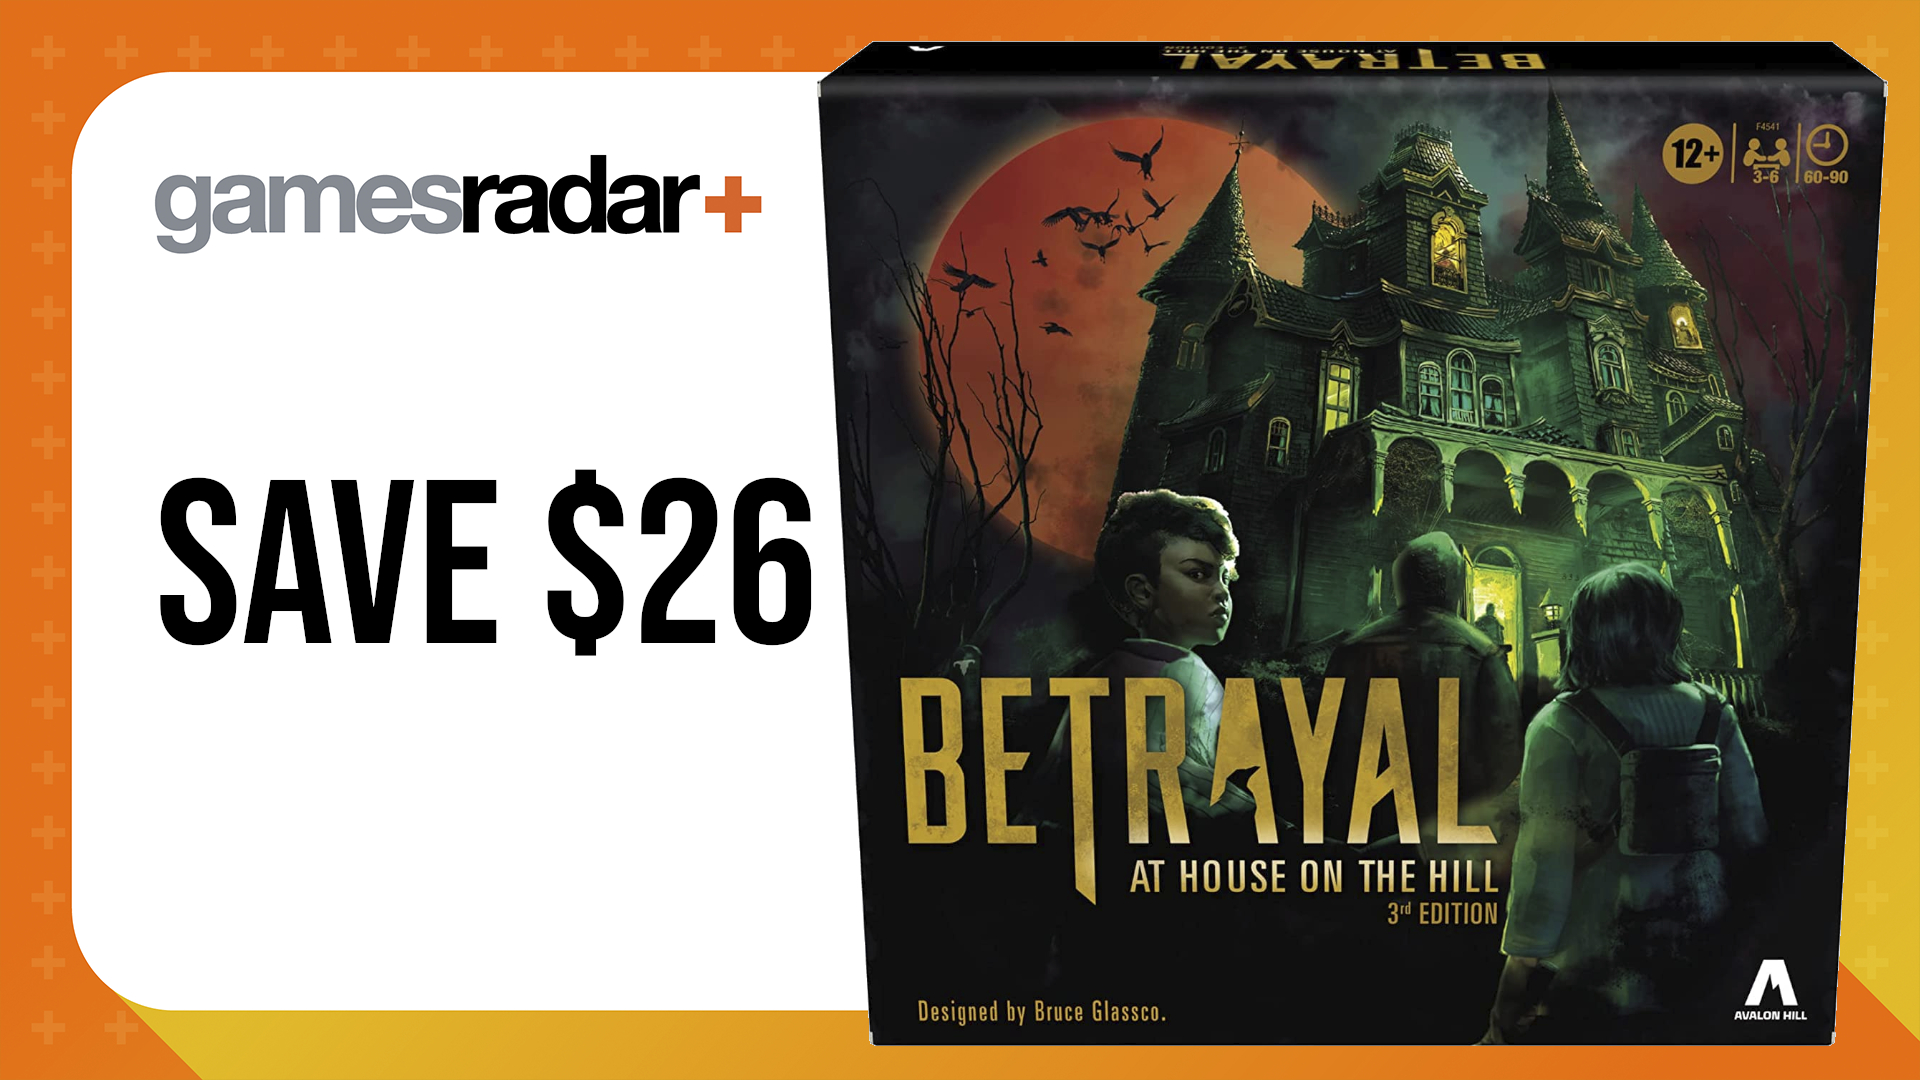 Cyber Monday board game deals with Betrayal at House on the Hill 3rd edition